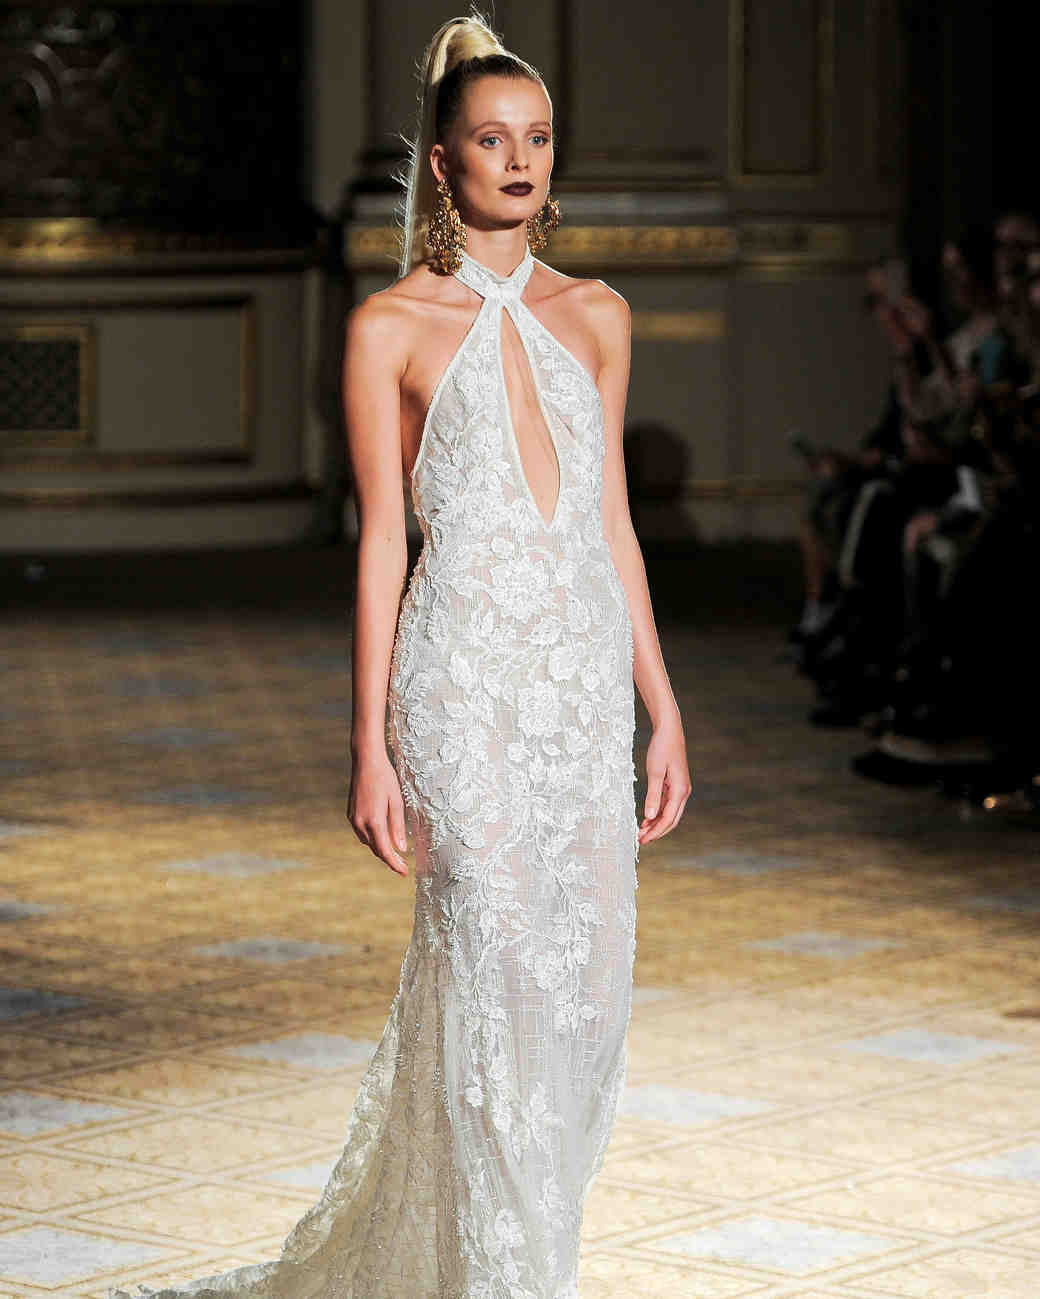 Sexy Wedding Dresses for Brides Who Want to Turn Heads | Martha Stewart ...